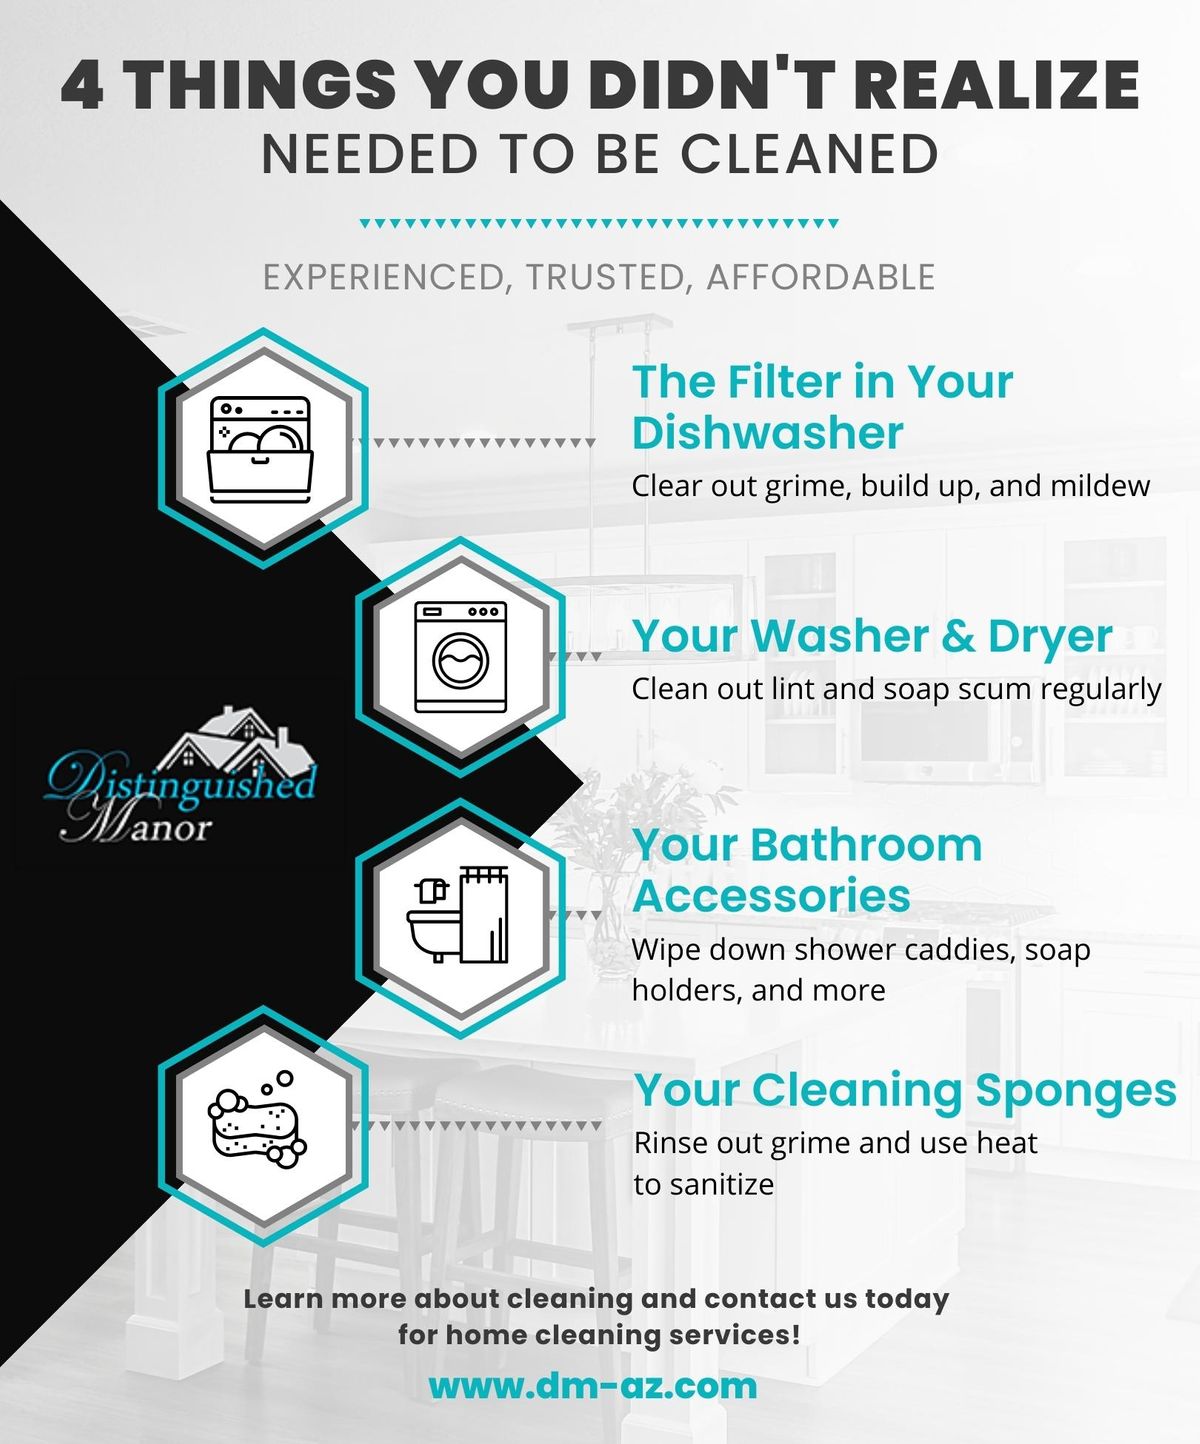 4 Things You Didn't Realize Needed to Be Cleaned Infographic